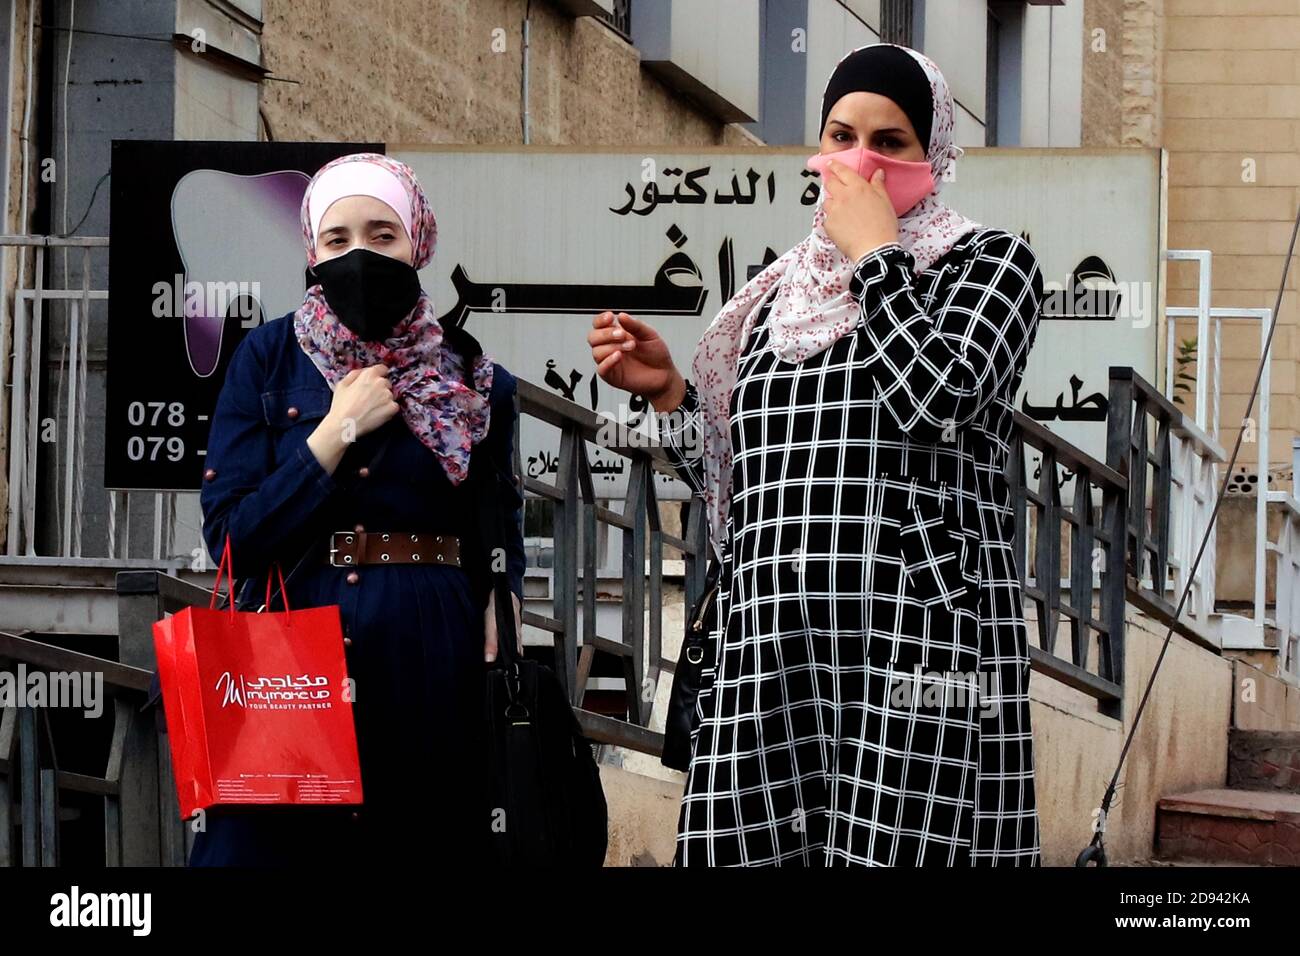 Amman, Jordan. 2nd Nov, 2020. People wearing face masks are seen on a street in Amman, capital of Jordan, on Nov. 2, 2020. Jordan on Monday recorded 5,877 new coronavirus cases, the highest daily spike in the country so far, raising the tally to 81,743. Credit: Mohammad Abu Ghosh/Xinhua/Alamy Live News Stock Photo